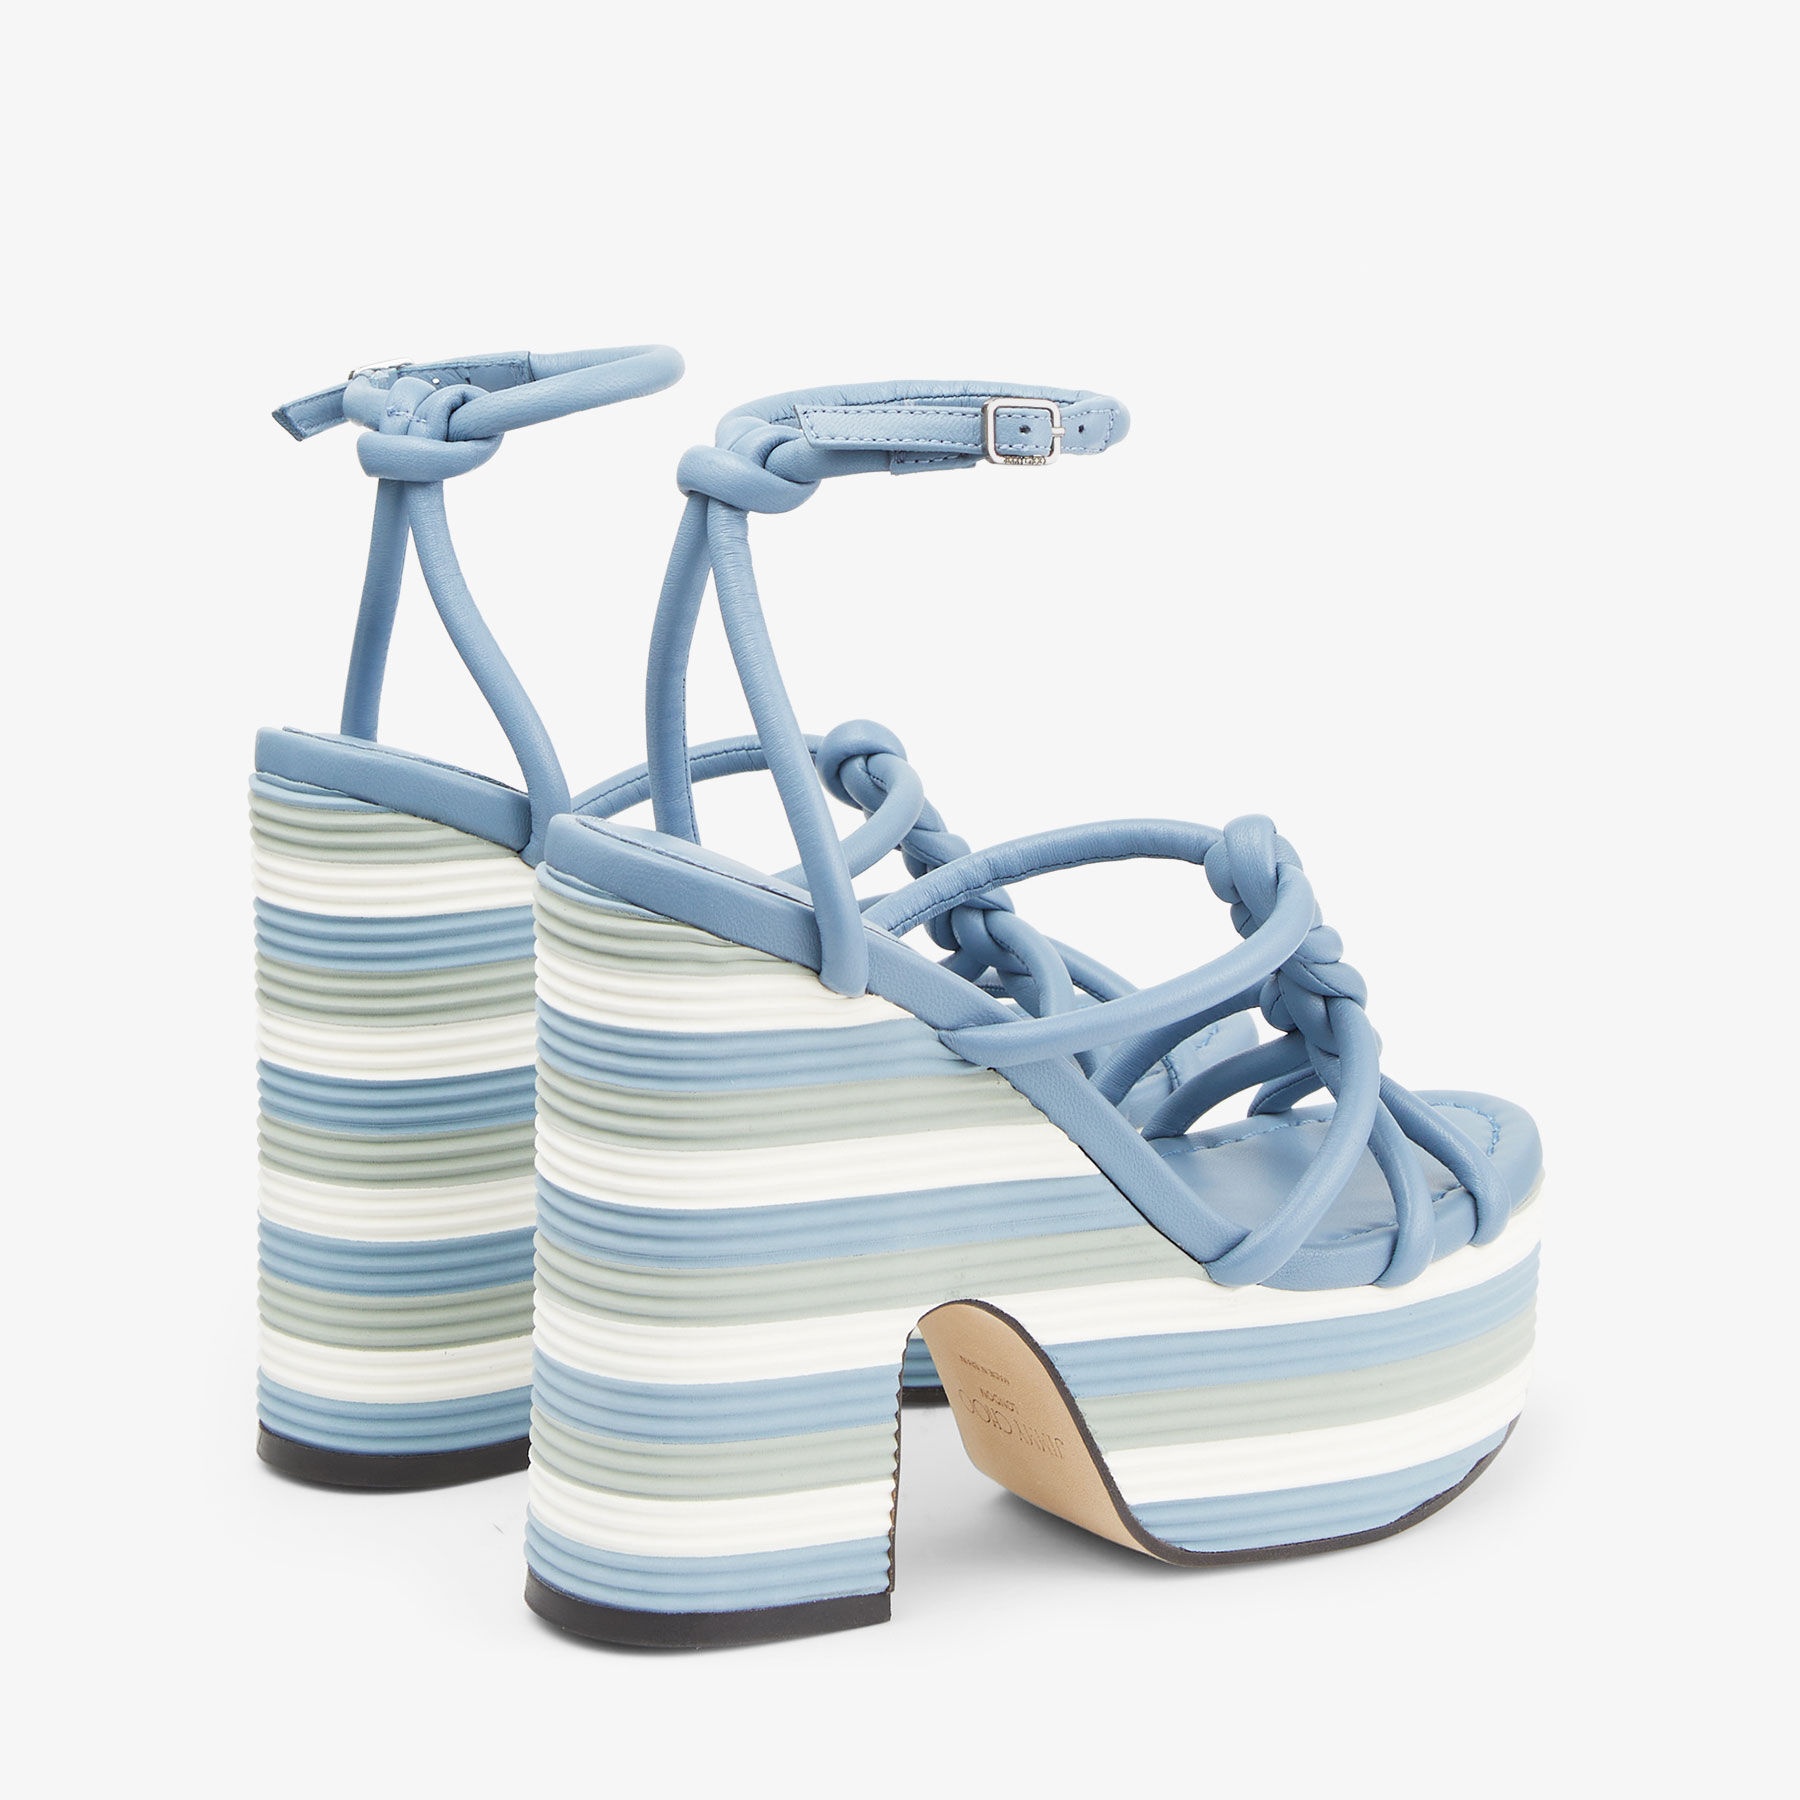 Clare Wedge 130
Smoky Blue Nappa Leather Wedge Sandals - 6